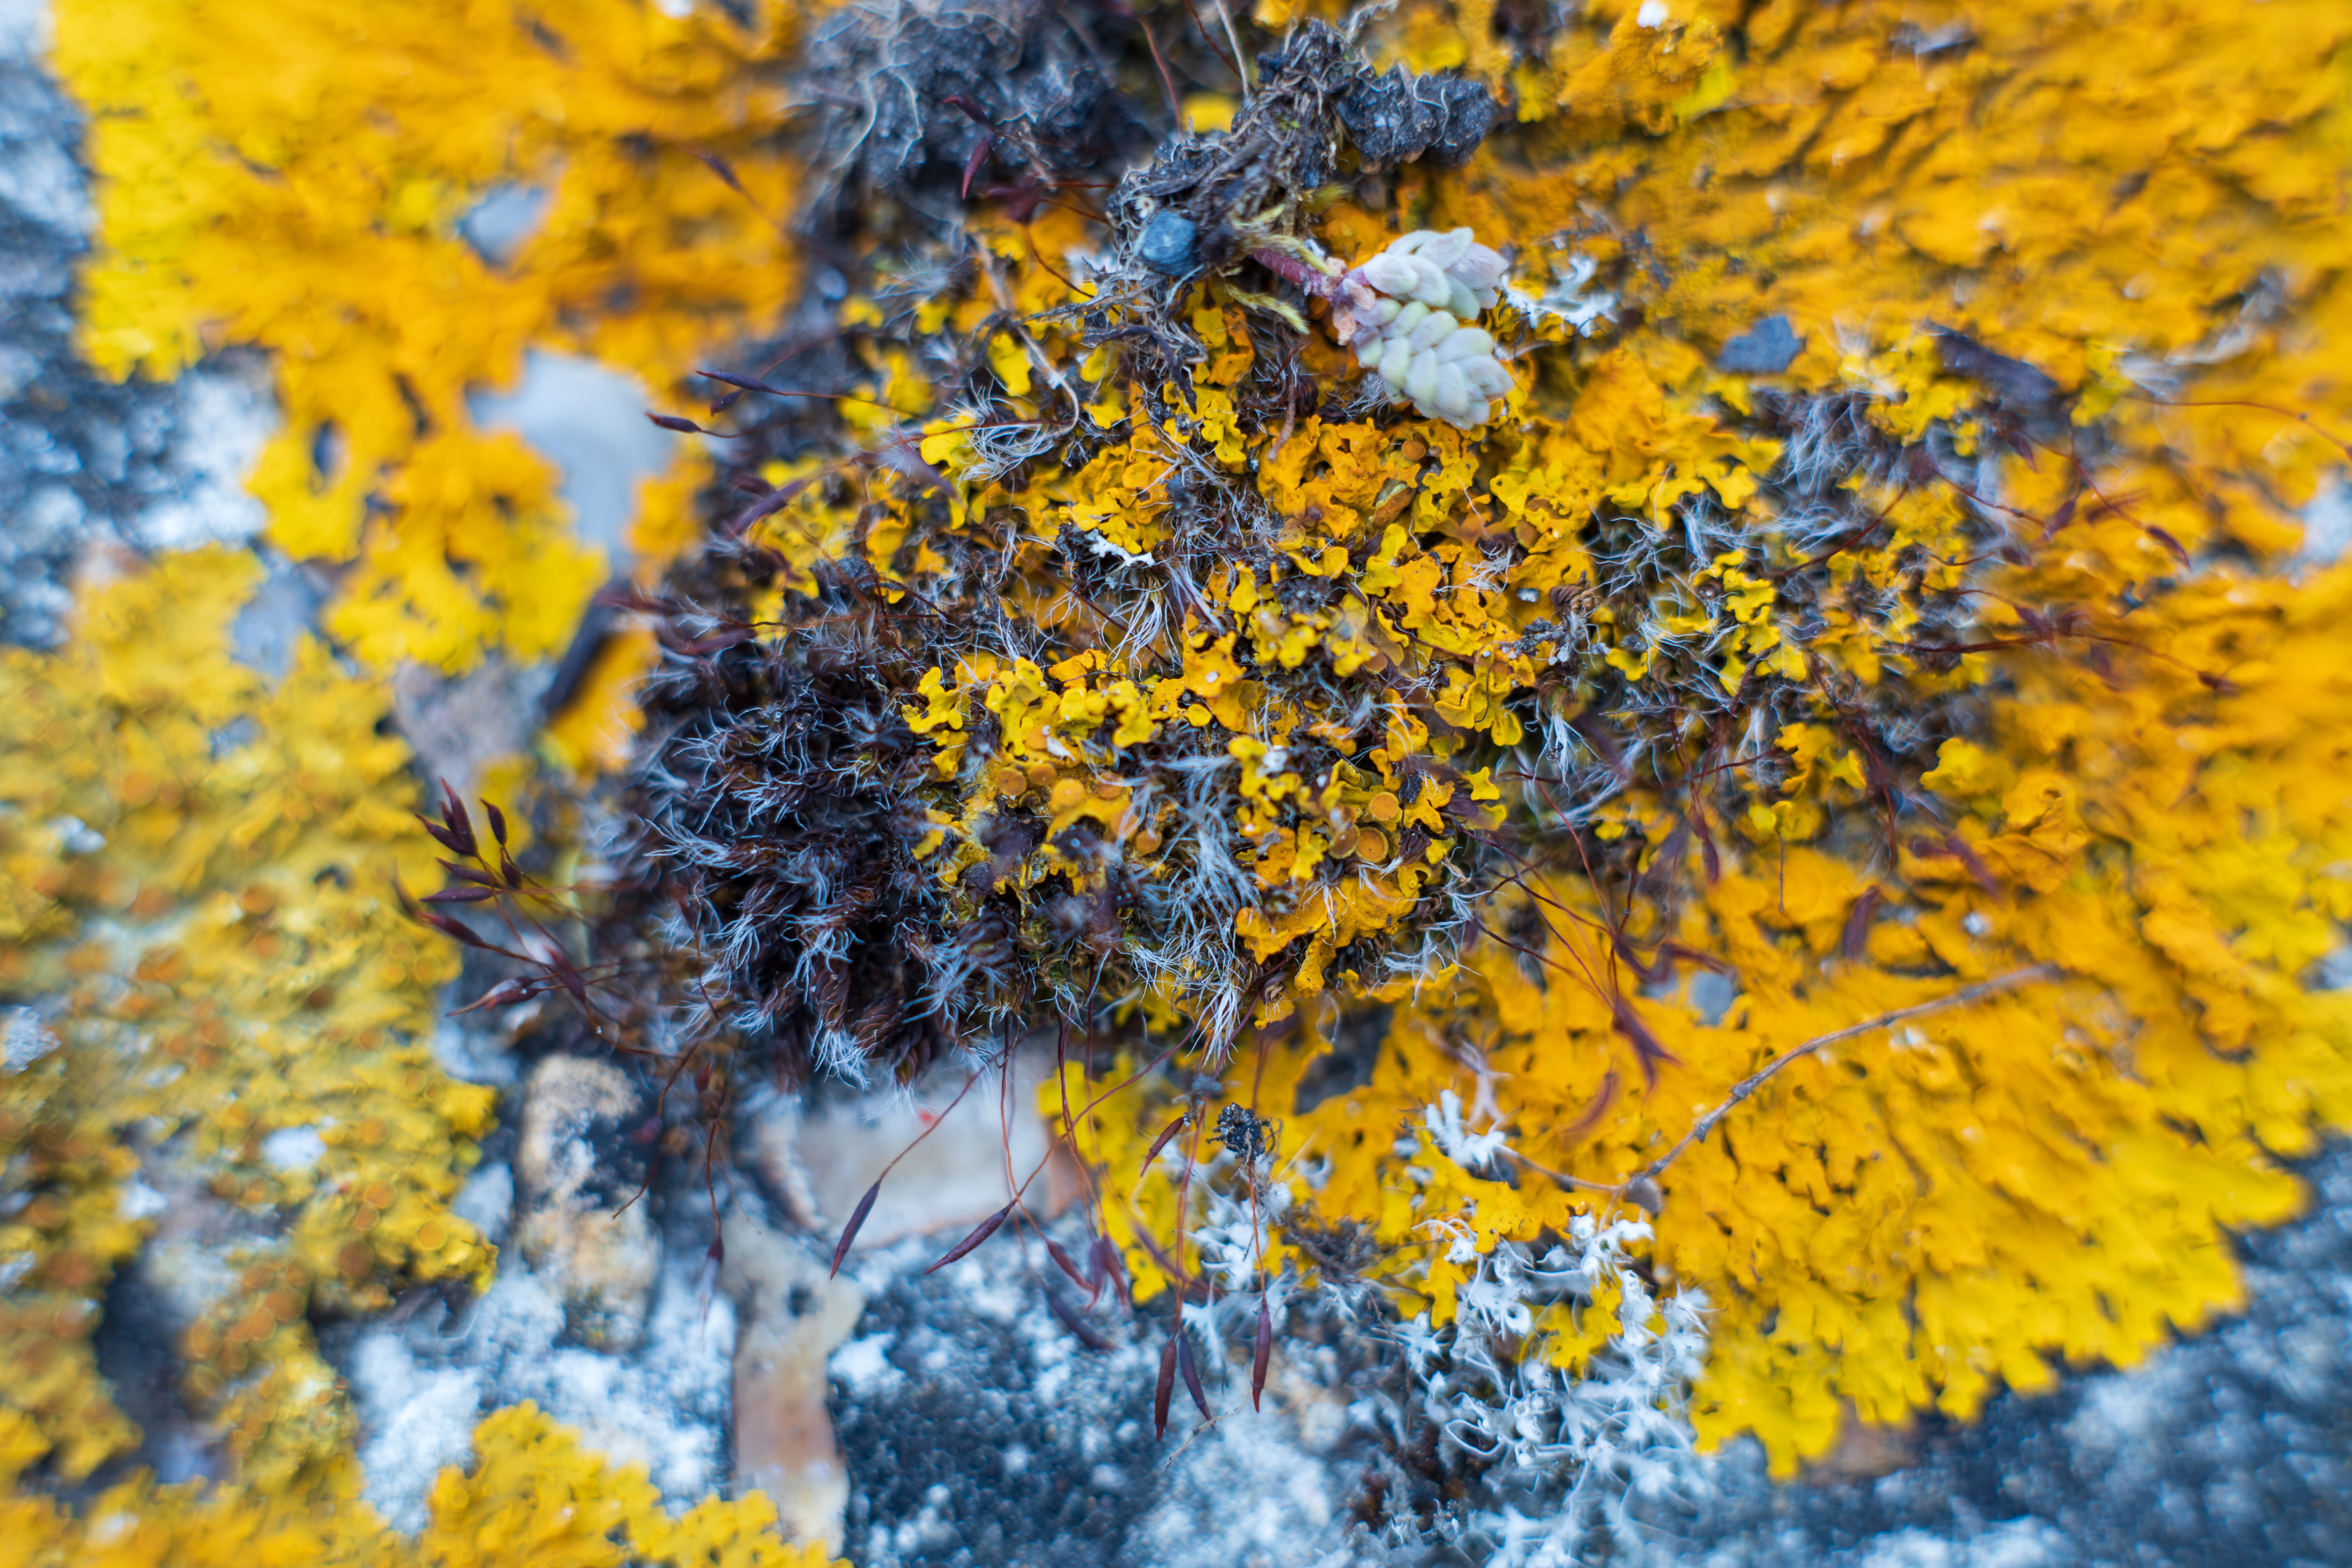 Lichens using the extension tube